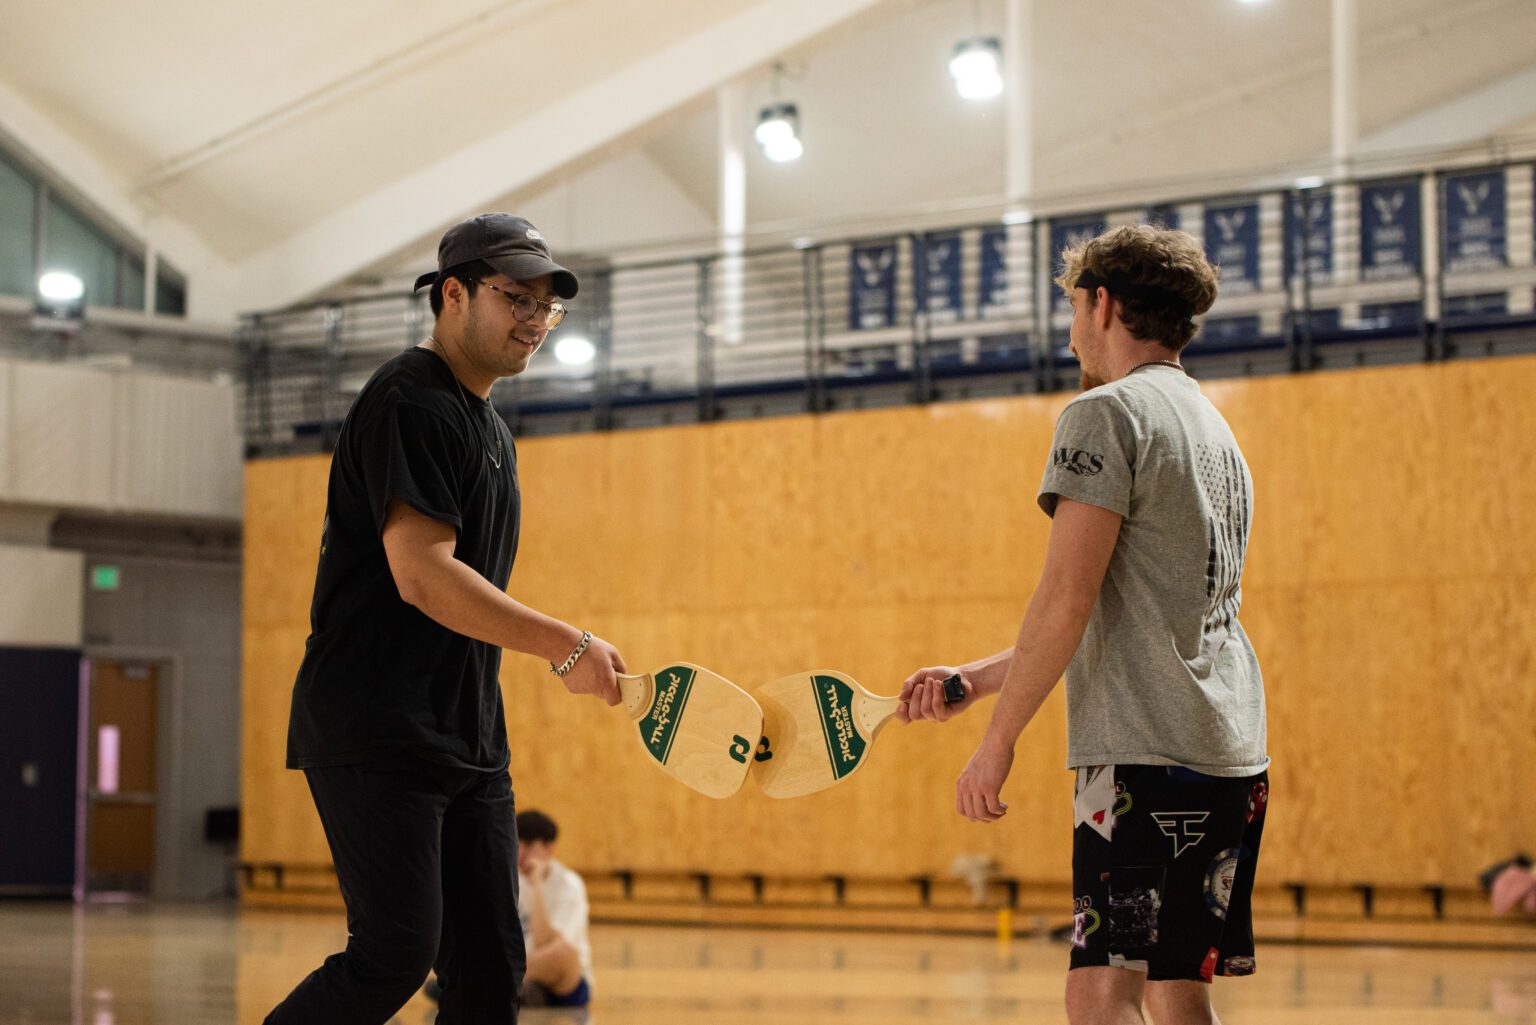 Western Washington University students Tyler Brill and Yosmith Hernandez slap paddles after scoring a point during a pickleball game at Carver Gymnasium on the Western Washington University campus Jan. 22.